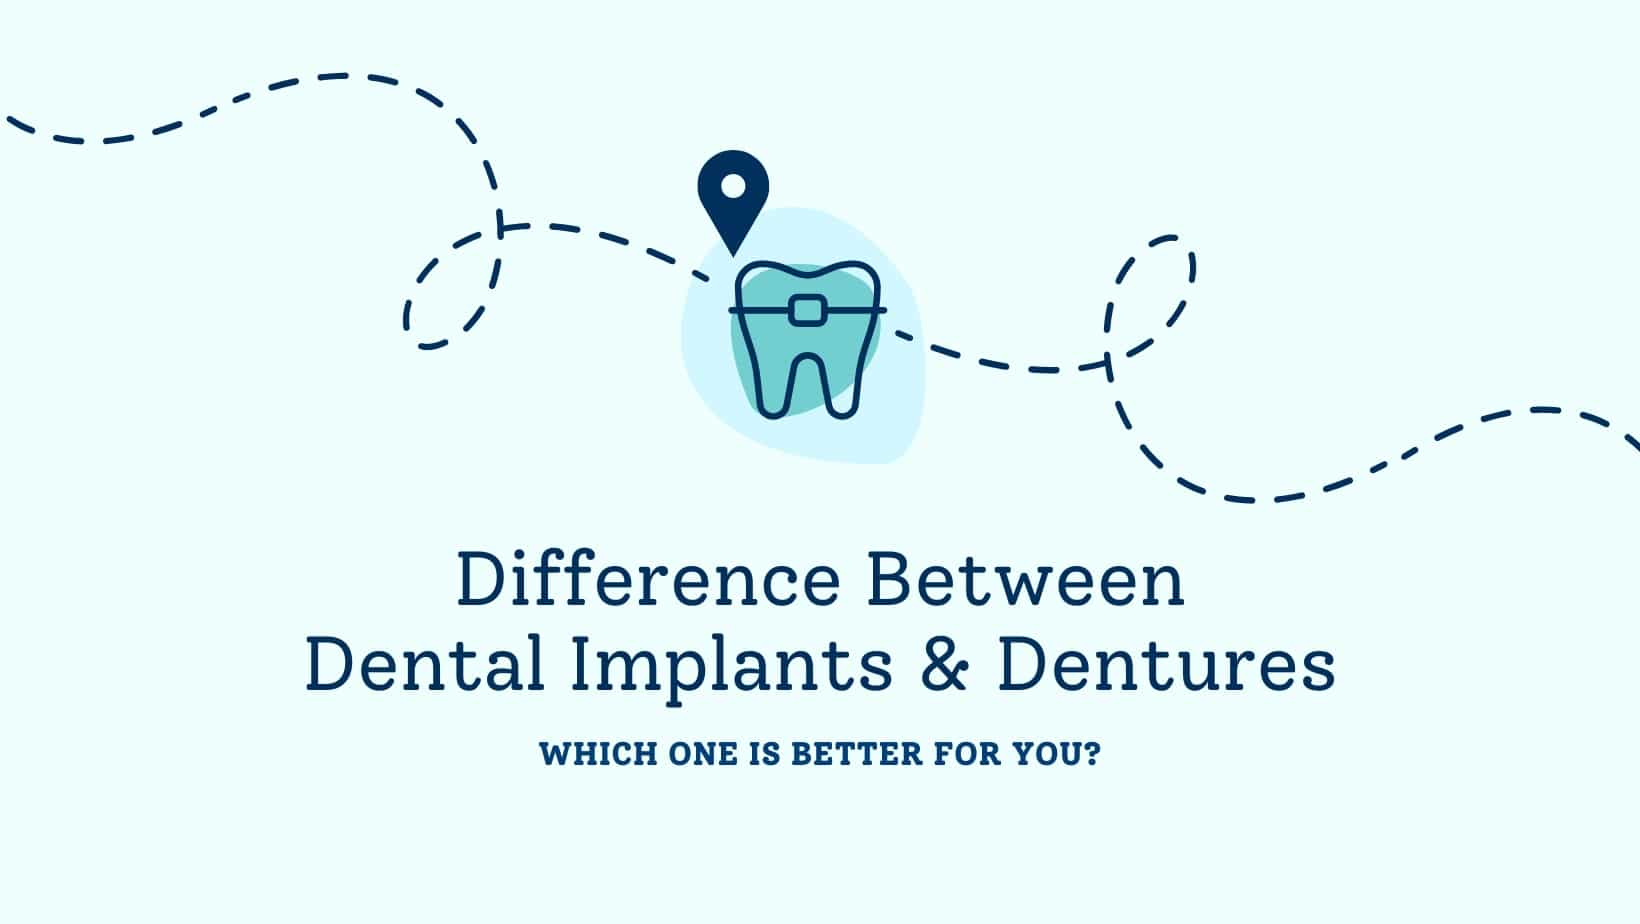 Difference between dental implants and dentures